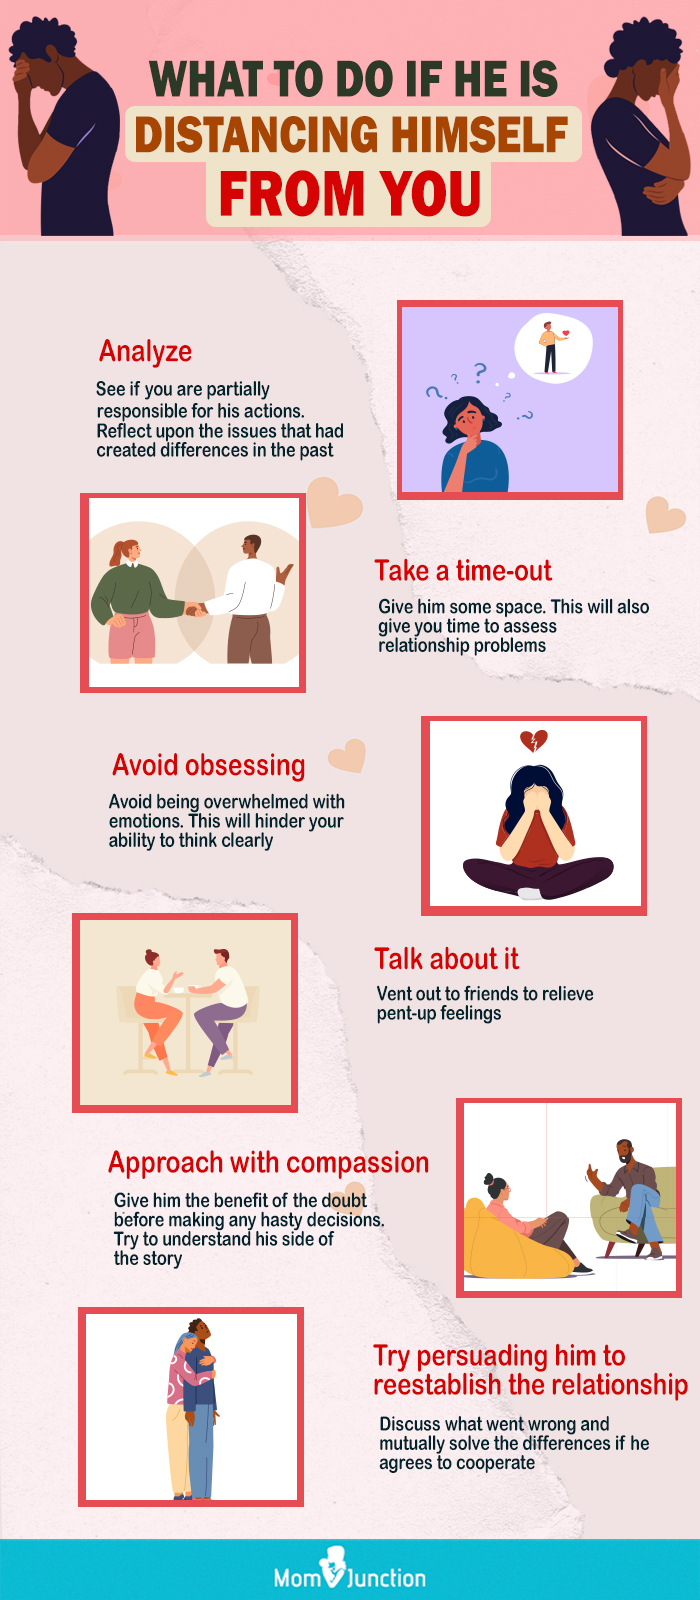 what to do if he is distancing himself from you [infographic]